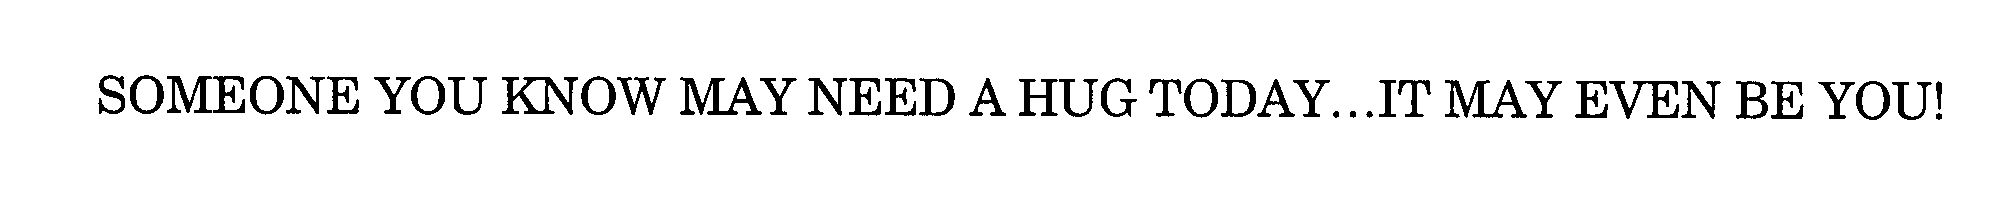  SOMEONE YOU KNOW NEEDS A HUG TODAY...IT MAY EVEN BE YOU!